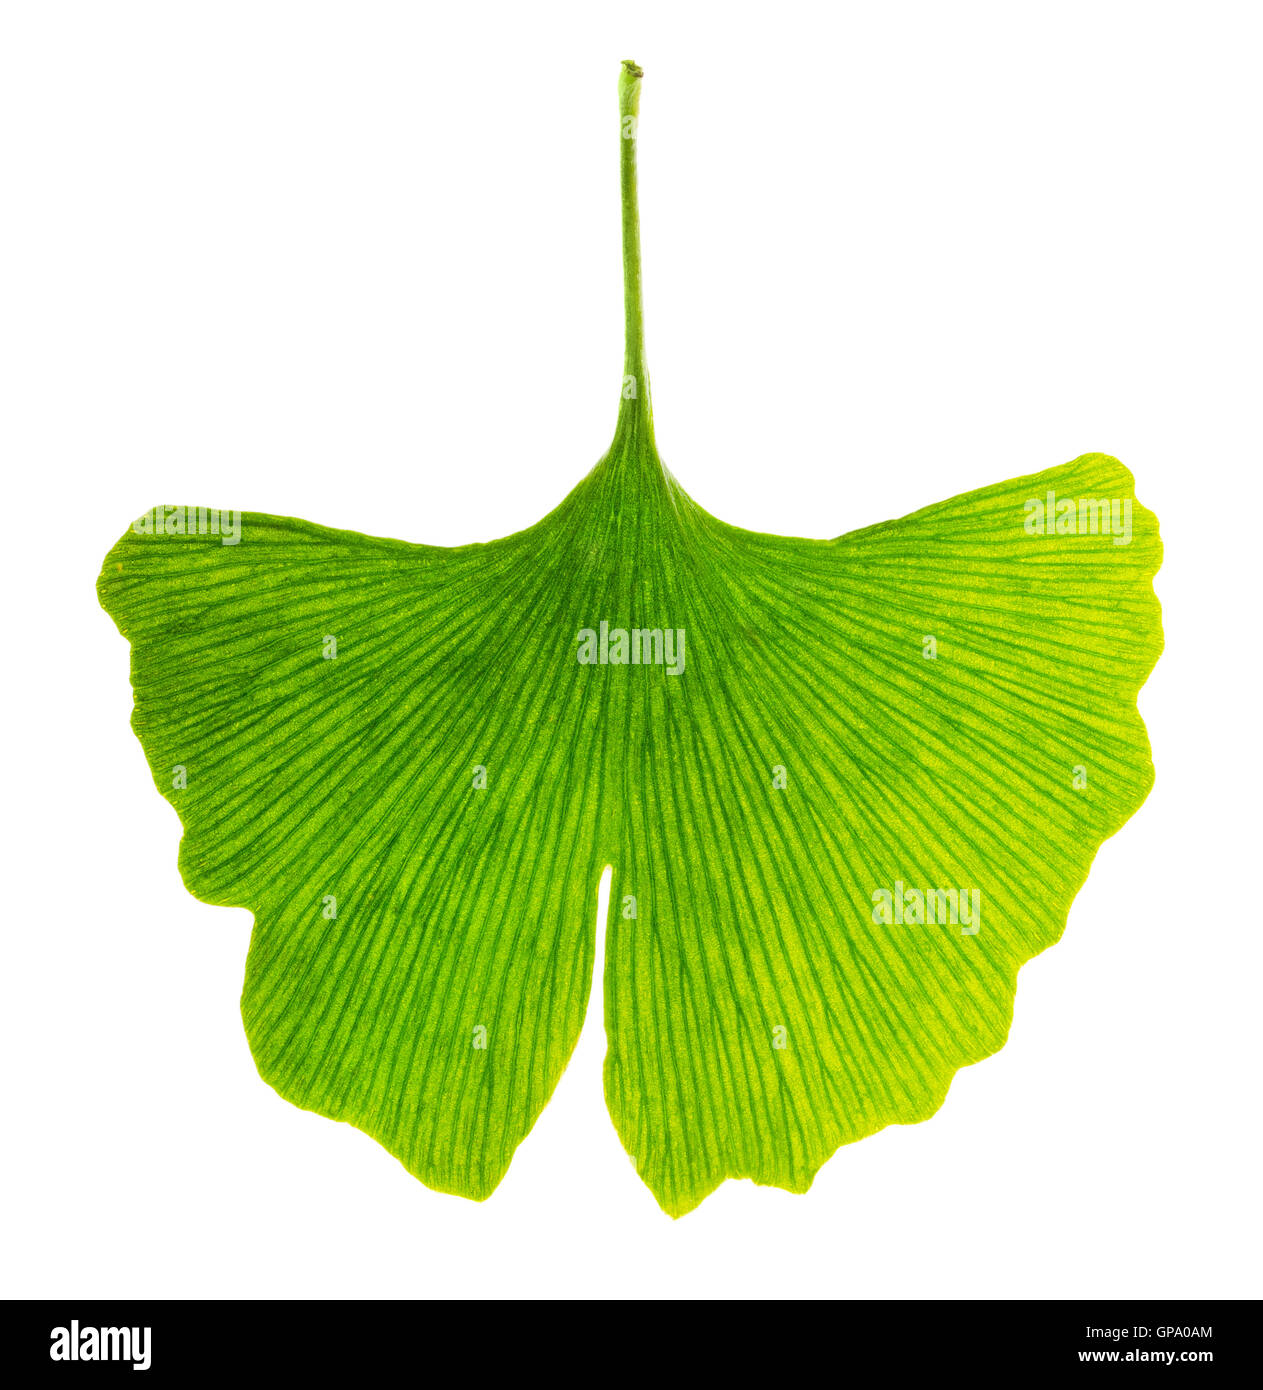 Ginkgo biloba leaf in transmitted light. Light passes through a translucent Ginkgo leaf. Also maidenhair tree. Stock Photo